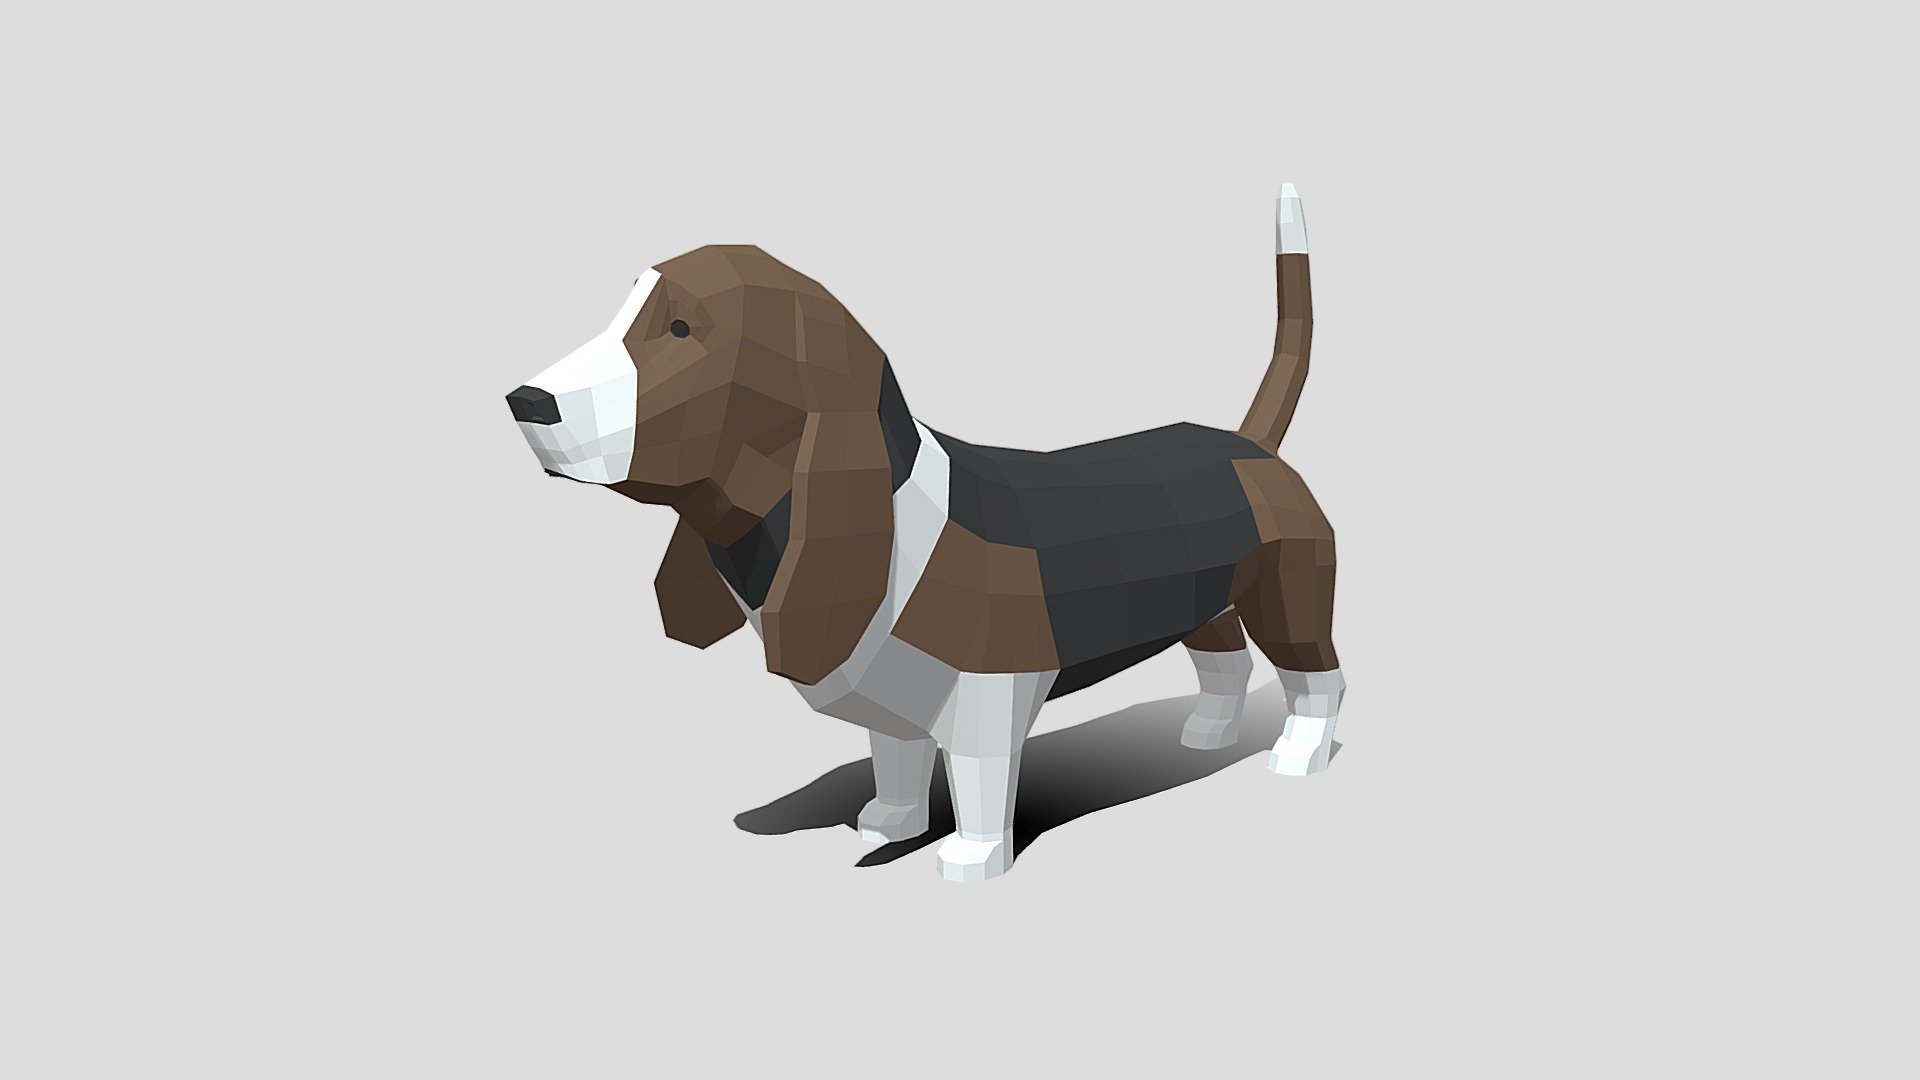 This is a low poly 3D model of a basset hound dog. The low poly dog was modeled and prepared for low-poly style renderings, background, general CG visualization presented as a mesh with quads only.

Verts : 900 Faces: 898

The 3D model have simple materials with diffuse colors.

No ring, maps and no UVW mapping is available.

The original file was created in blender. You will receive a 3DS, OBJ, FBX, blend, DAE, Stl.

All preview images were rendered with Blender Cycles. Product is ready to render out-of-the-box. Please note that the lights, cameras, and background is only included in the .blend file. The model is clean and alone in the other provided files, centred at origin and has real-world scale 3d model